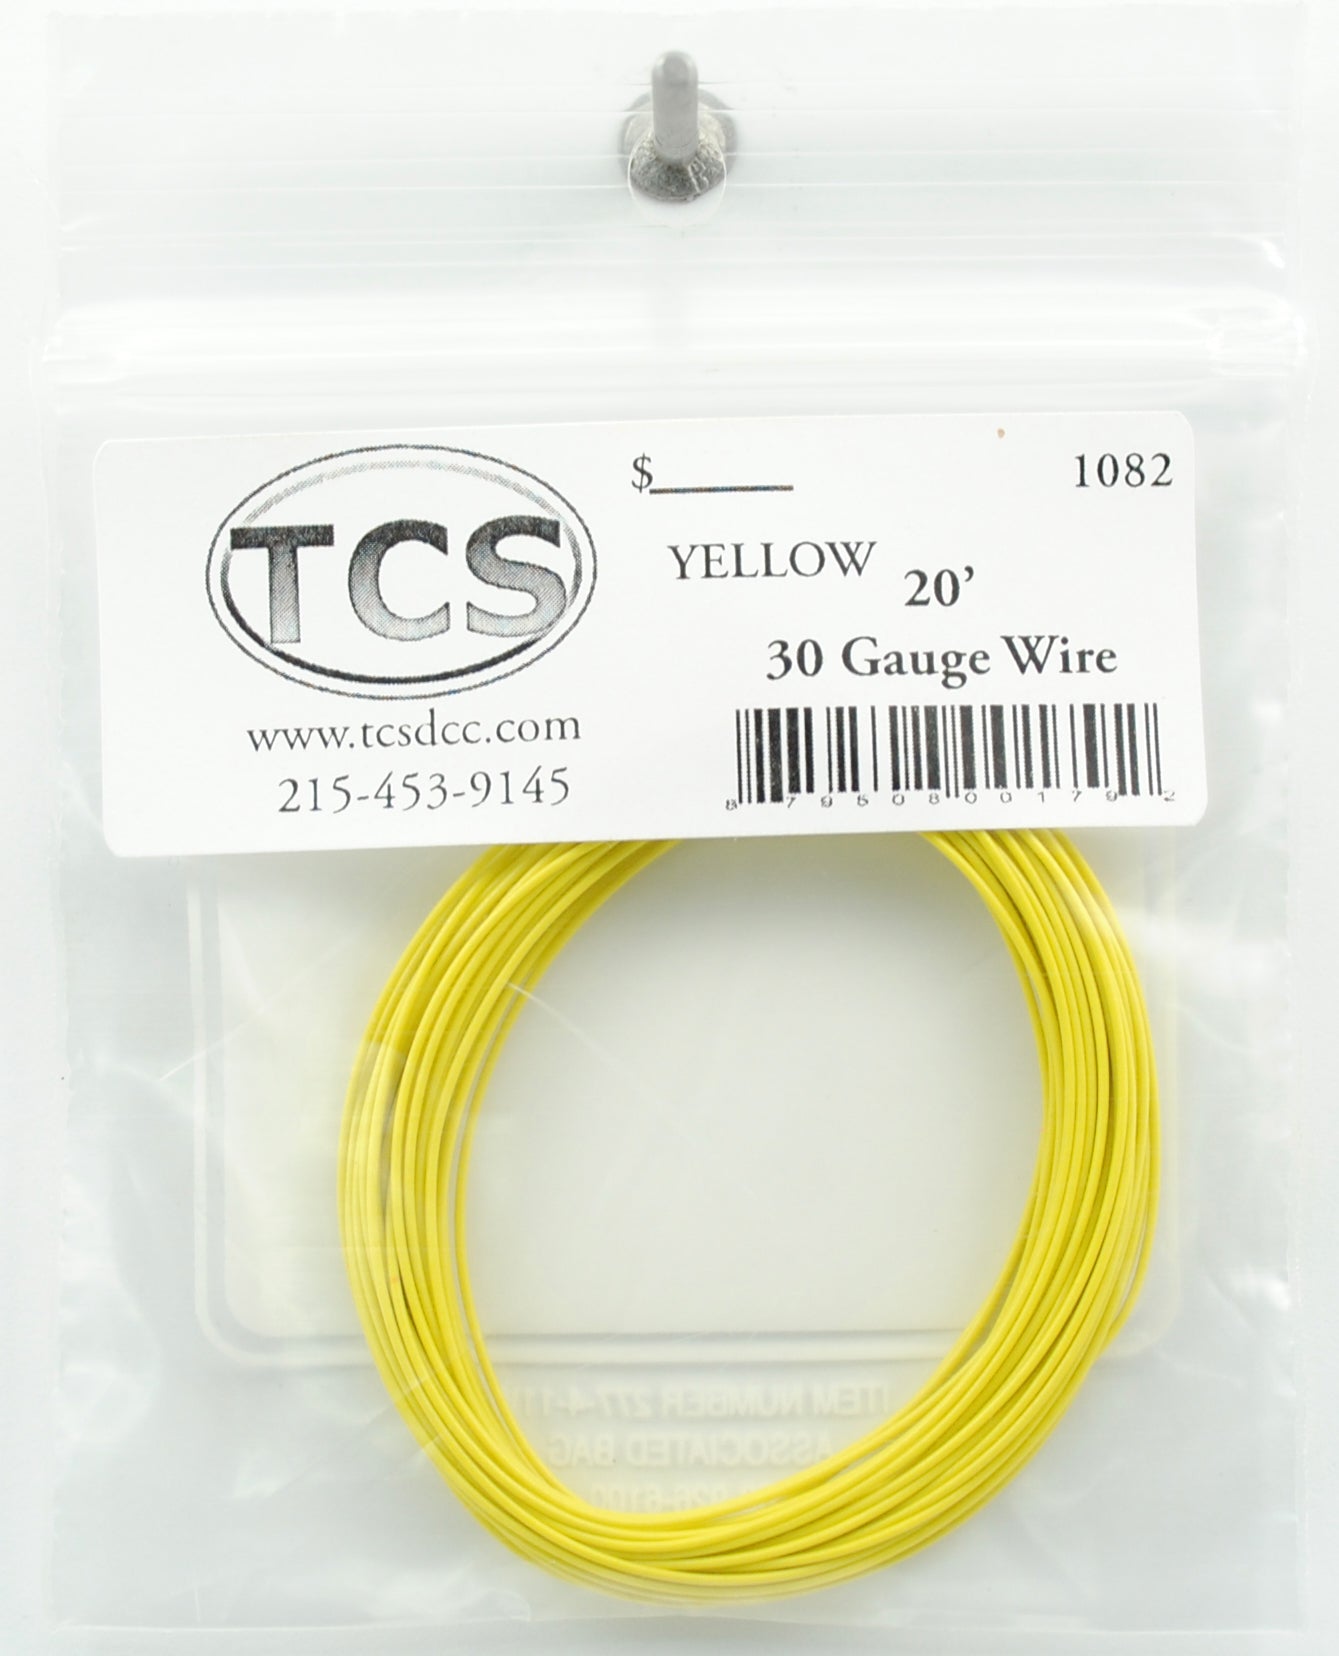 Train Control Systems 1082 20' of 30 Gauge Wire, Yellow